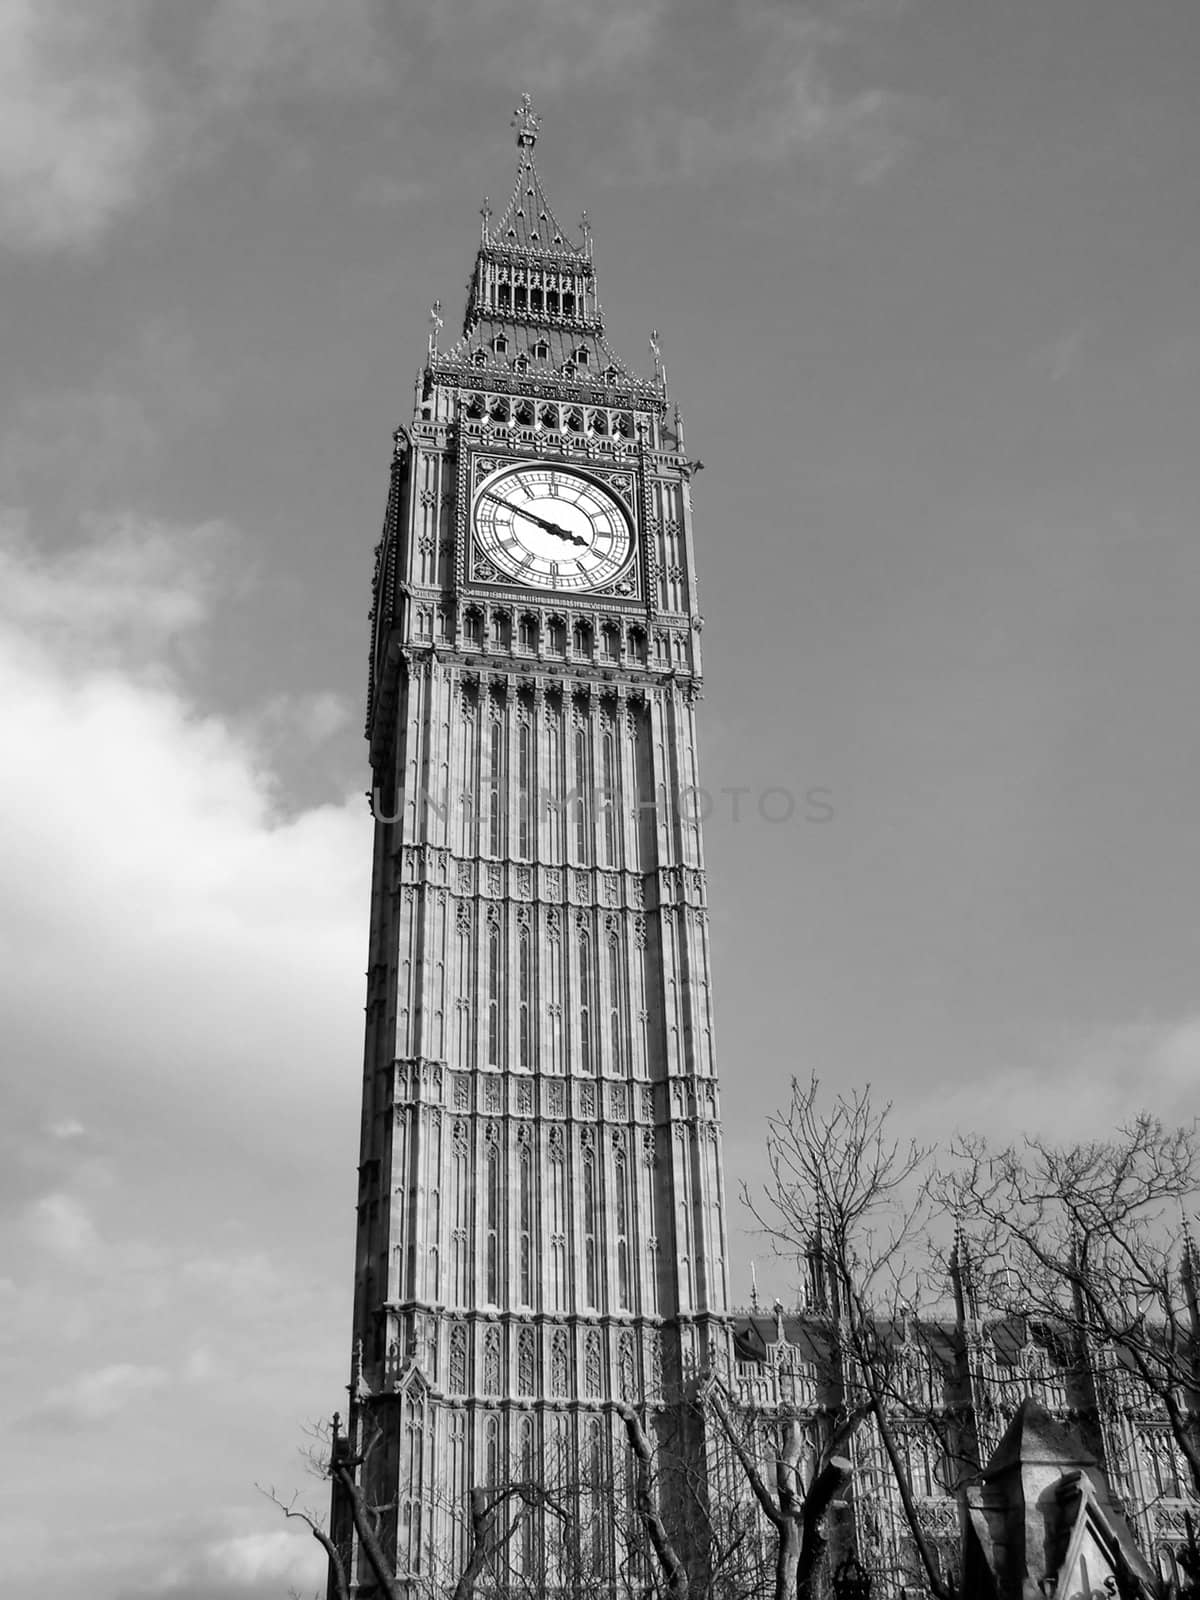 Big Ben at the Houses of Parliament, Westminster Palace, London, UK